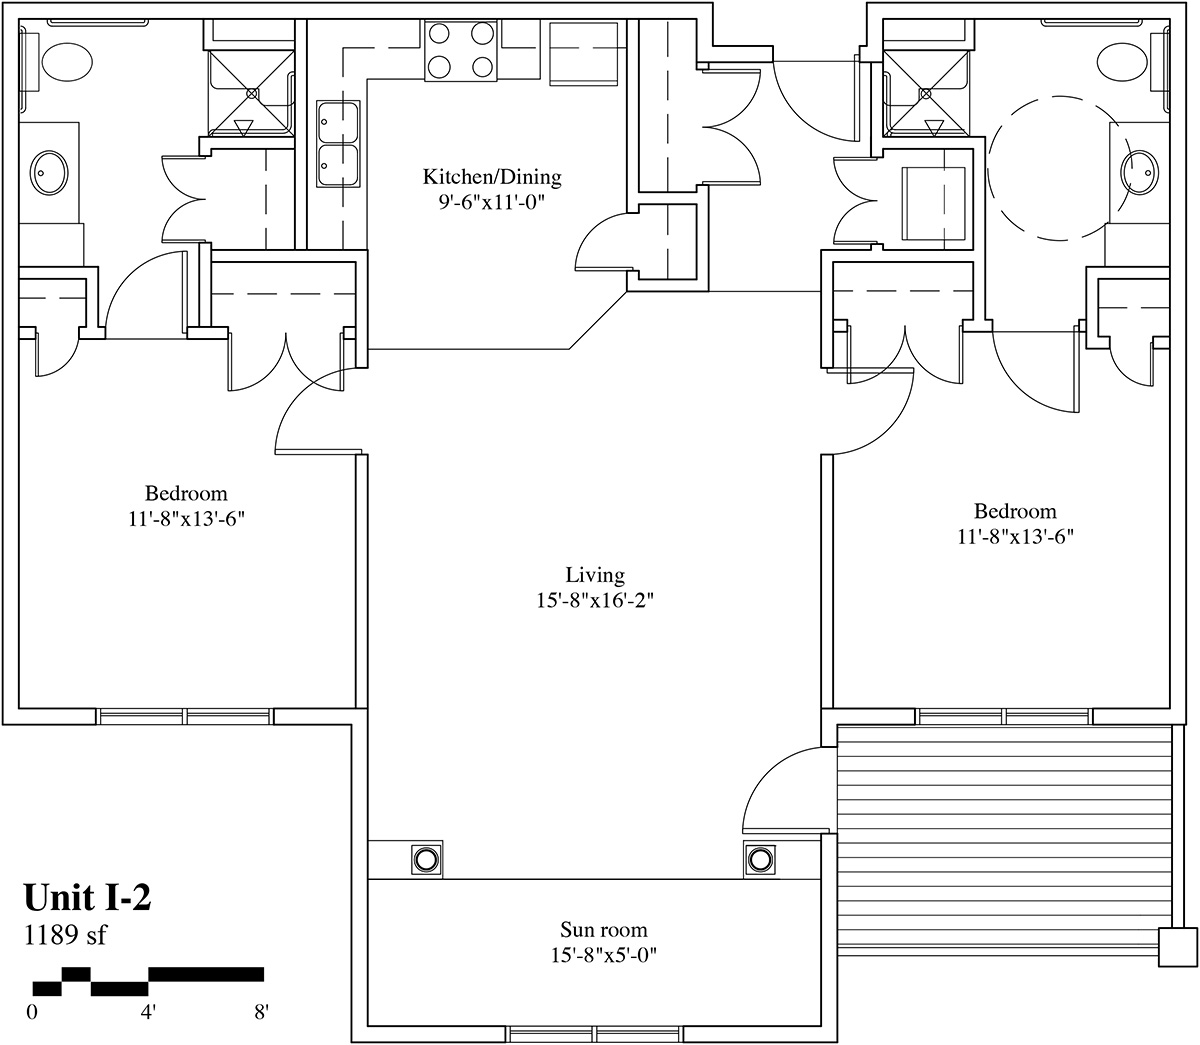 The Elms Deluxe – Two Bedroom 1189 sf